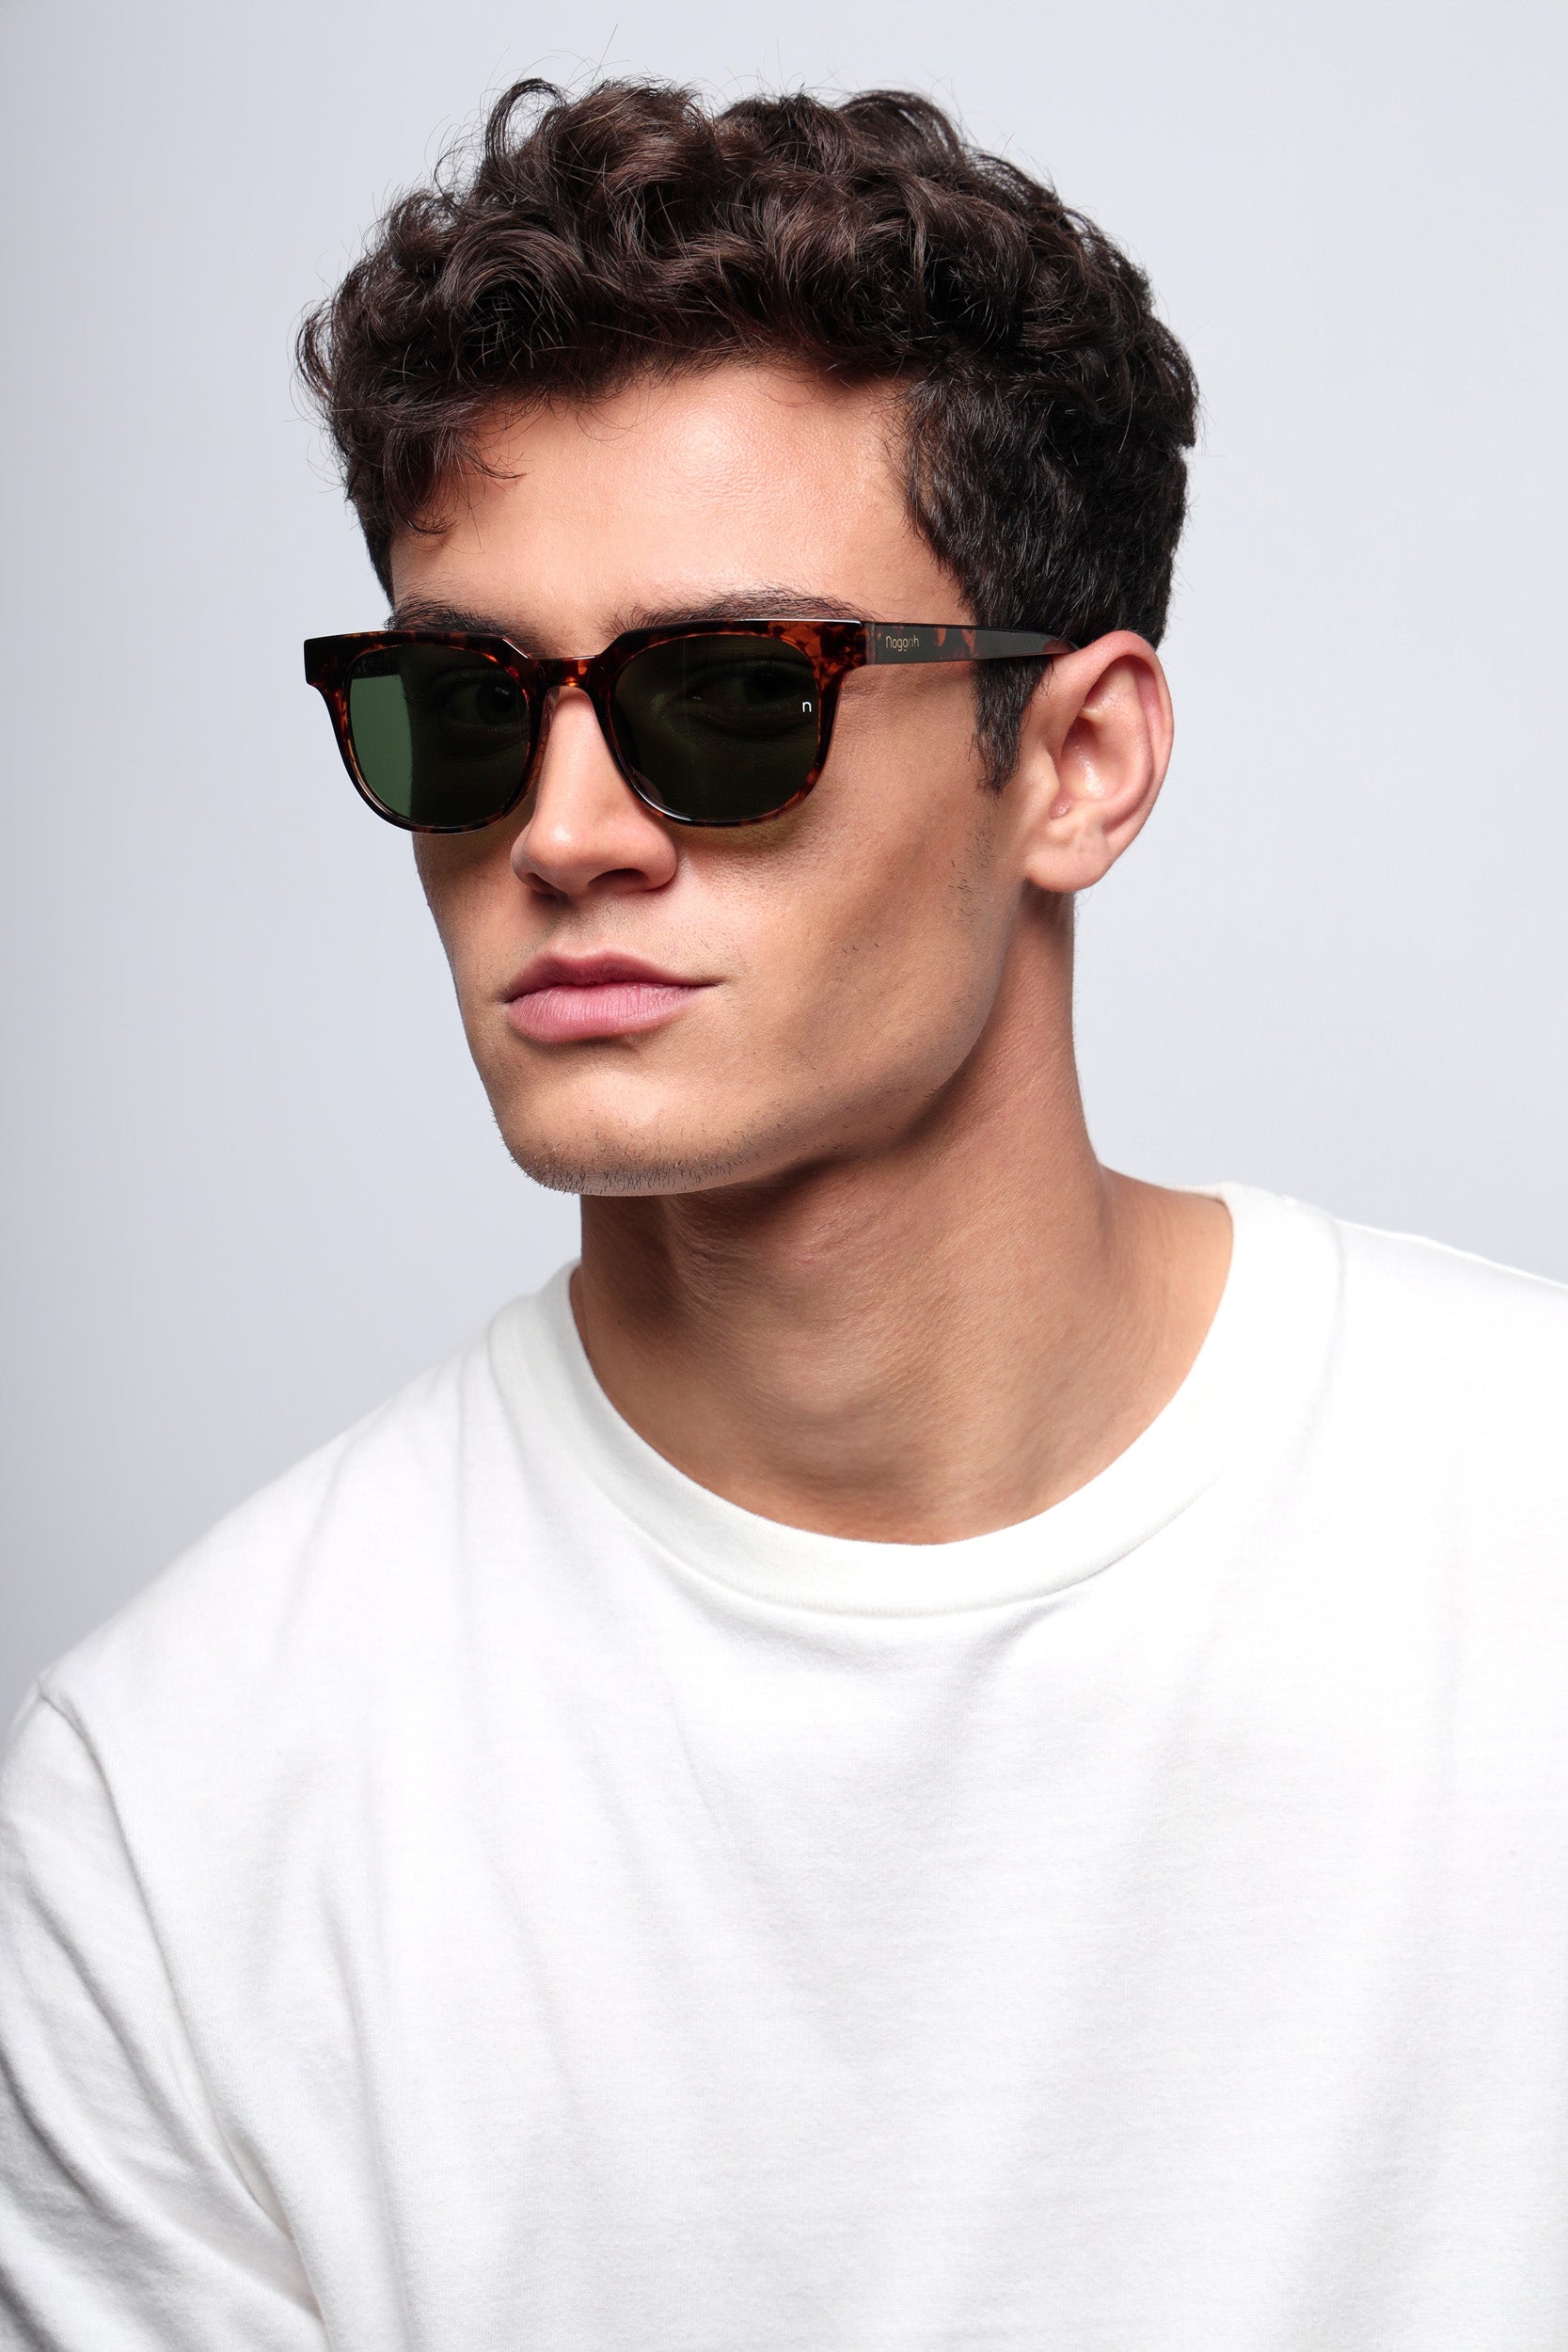 Glass lens sunglasses, UP TO 69% OFF amazing clearance sale 